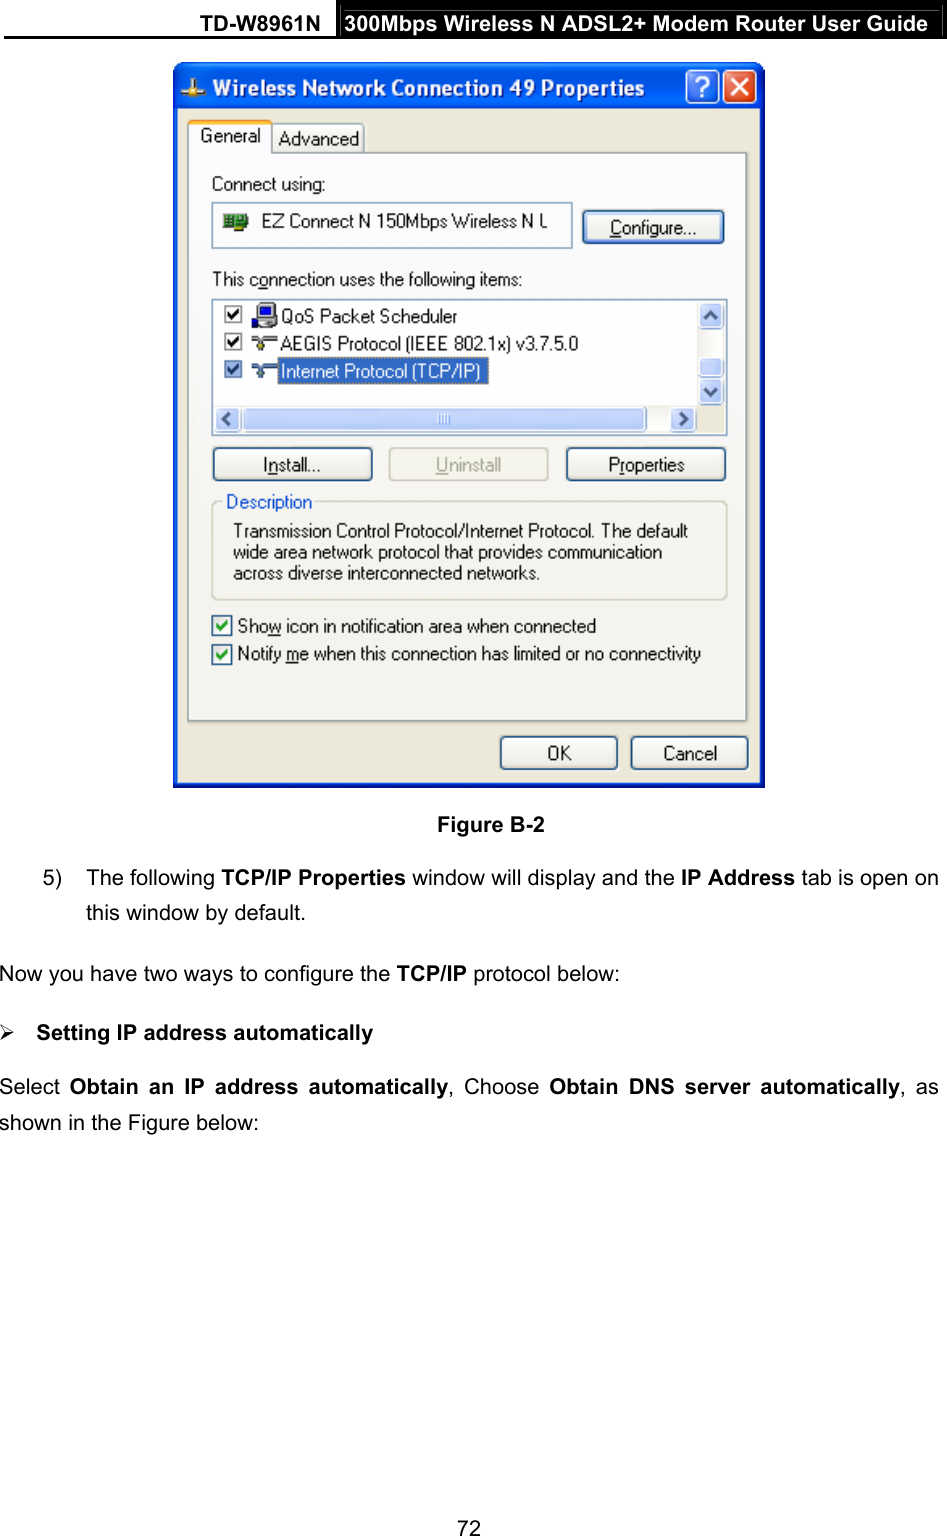 TD-W8961N  300Mbps Wireless N ADSL2+ Modem Router User Guide 72   Figure B-2 5) The following TCP/IP Properties window will display and the IP Address tab is open on this window by default. Now you have two ways to configure the TCP/IP protocol below:  Setting IP address automatically Select  Obtain an IP address automatically, Choose Obtain DNS server automatically, as shown in the Figure below: 